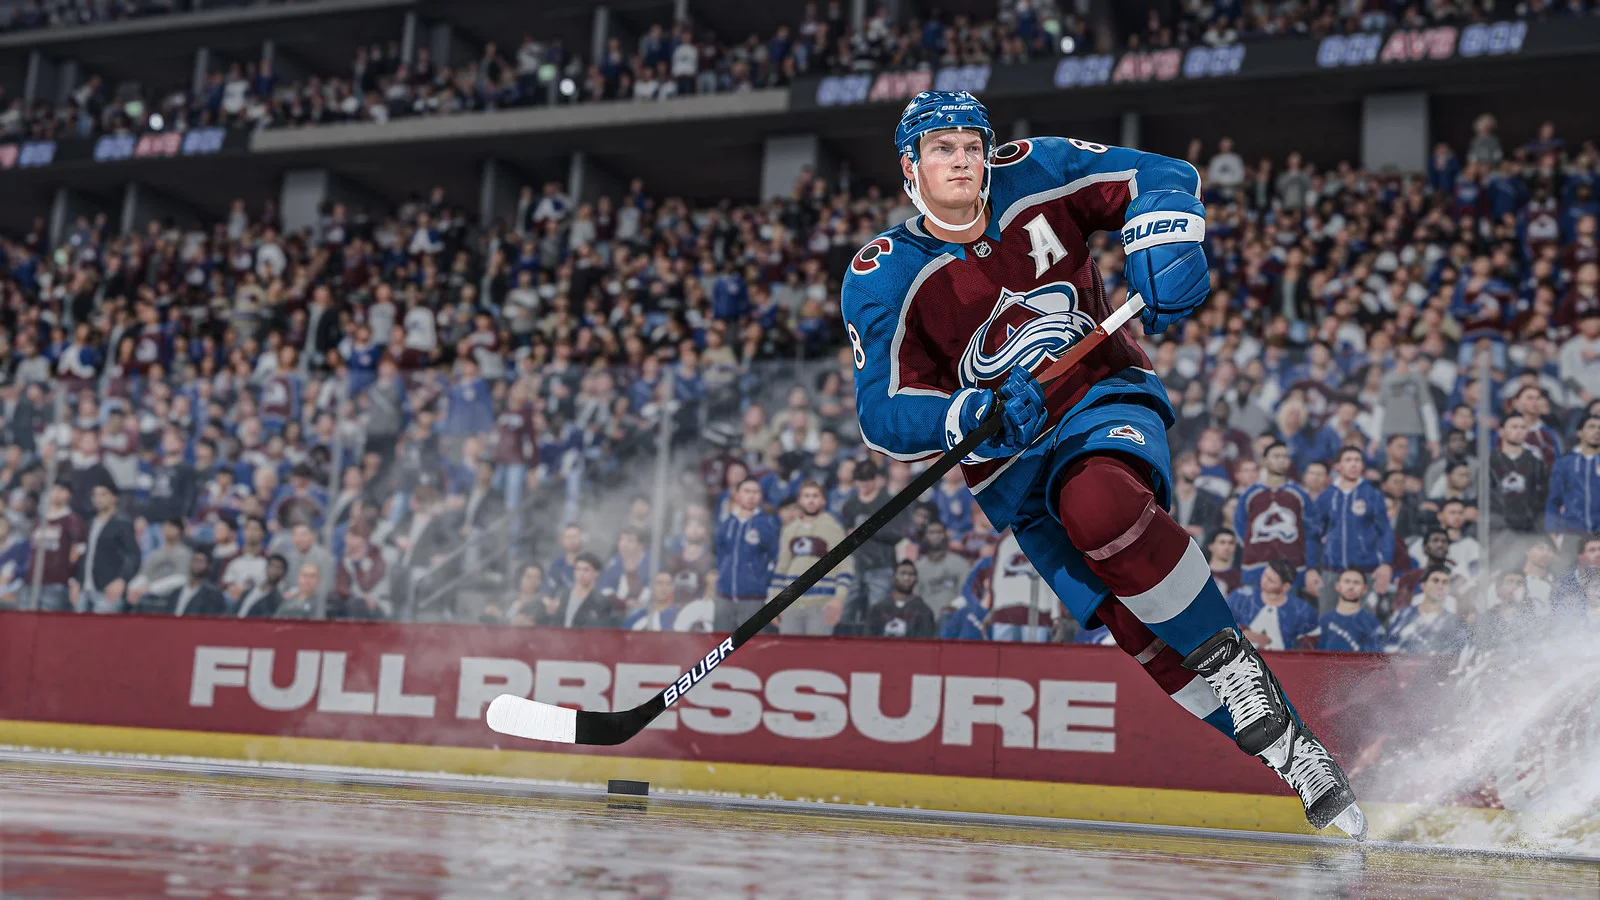 The first details about NHL 24 have appeared. A gameplay trailer has also been released